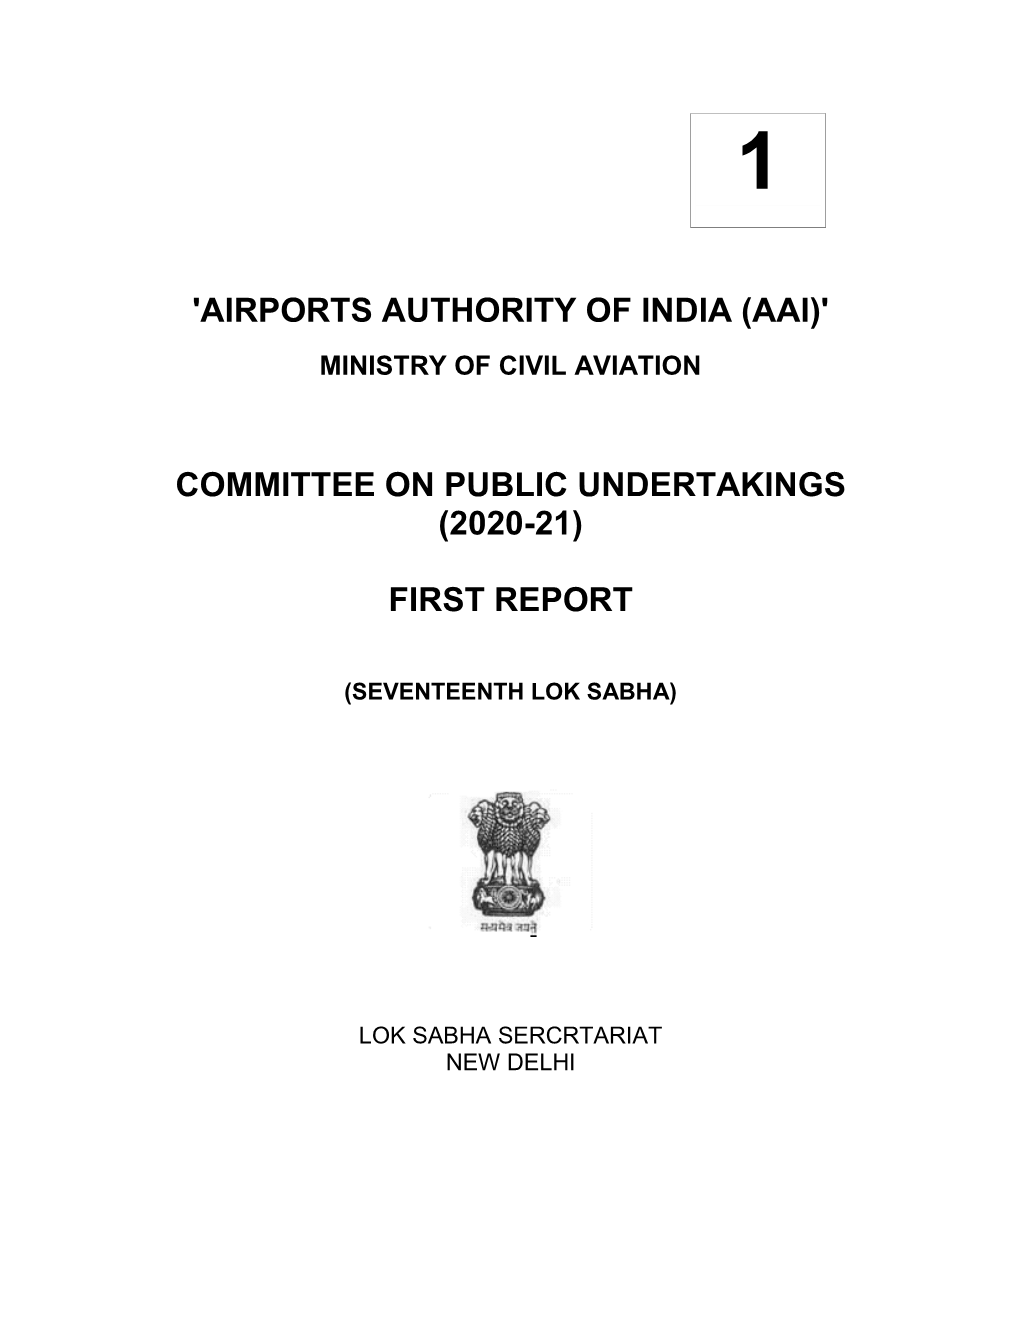 'Airports Authority of India (Aai)' Committee on Public